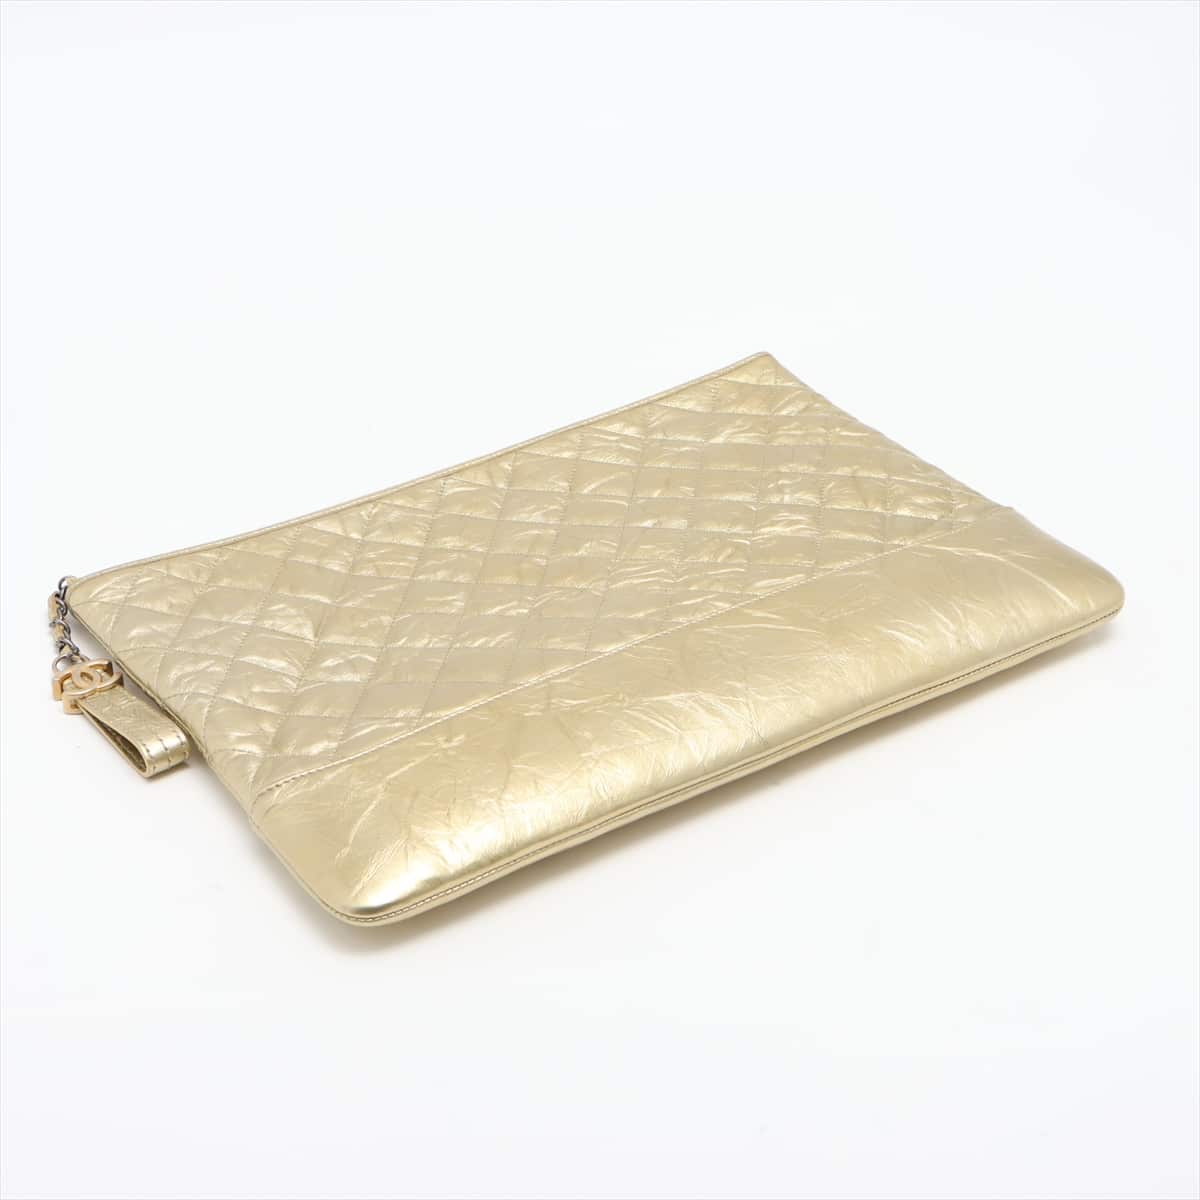 Chanel Gabrielle Doo Chanel Leather Clutch bag Matelasse Gold Silver Metal fittings 25XXXXXX